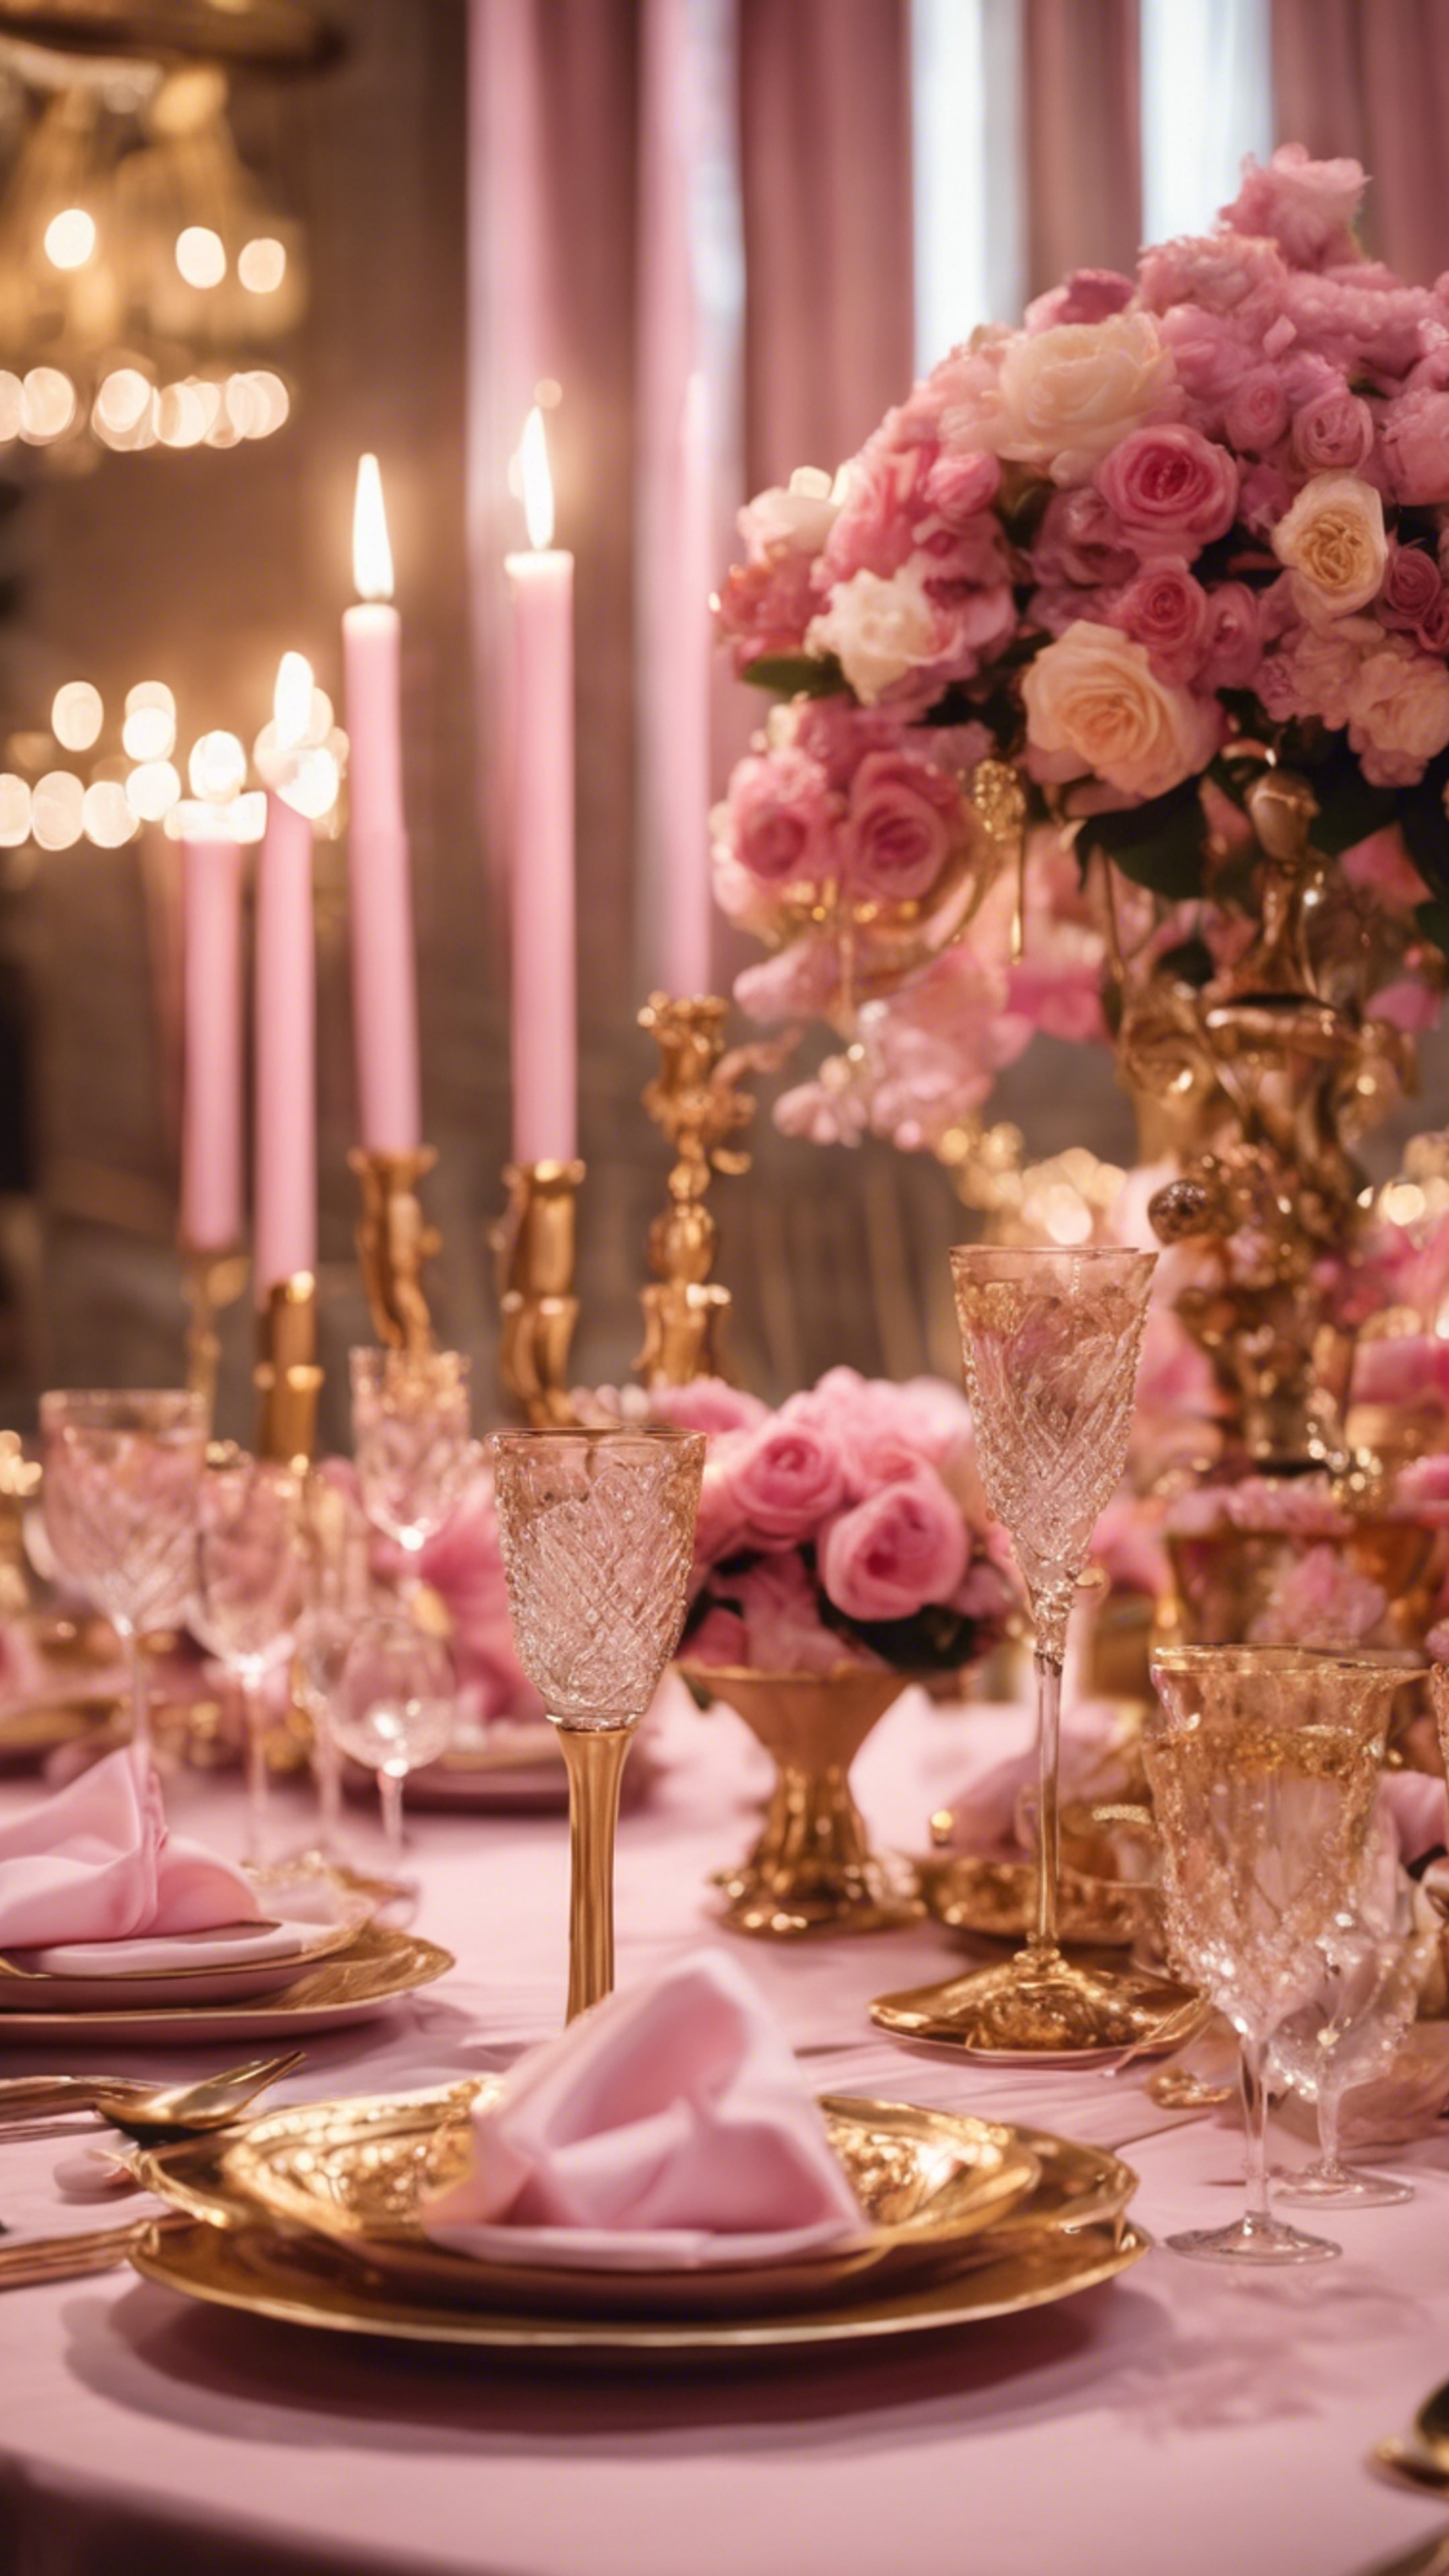 An elegant pink and gold-themed dining table set for an evening soiree. Ταπετσαρία[a96f4c3be44f41948a30]